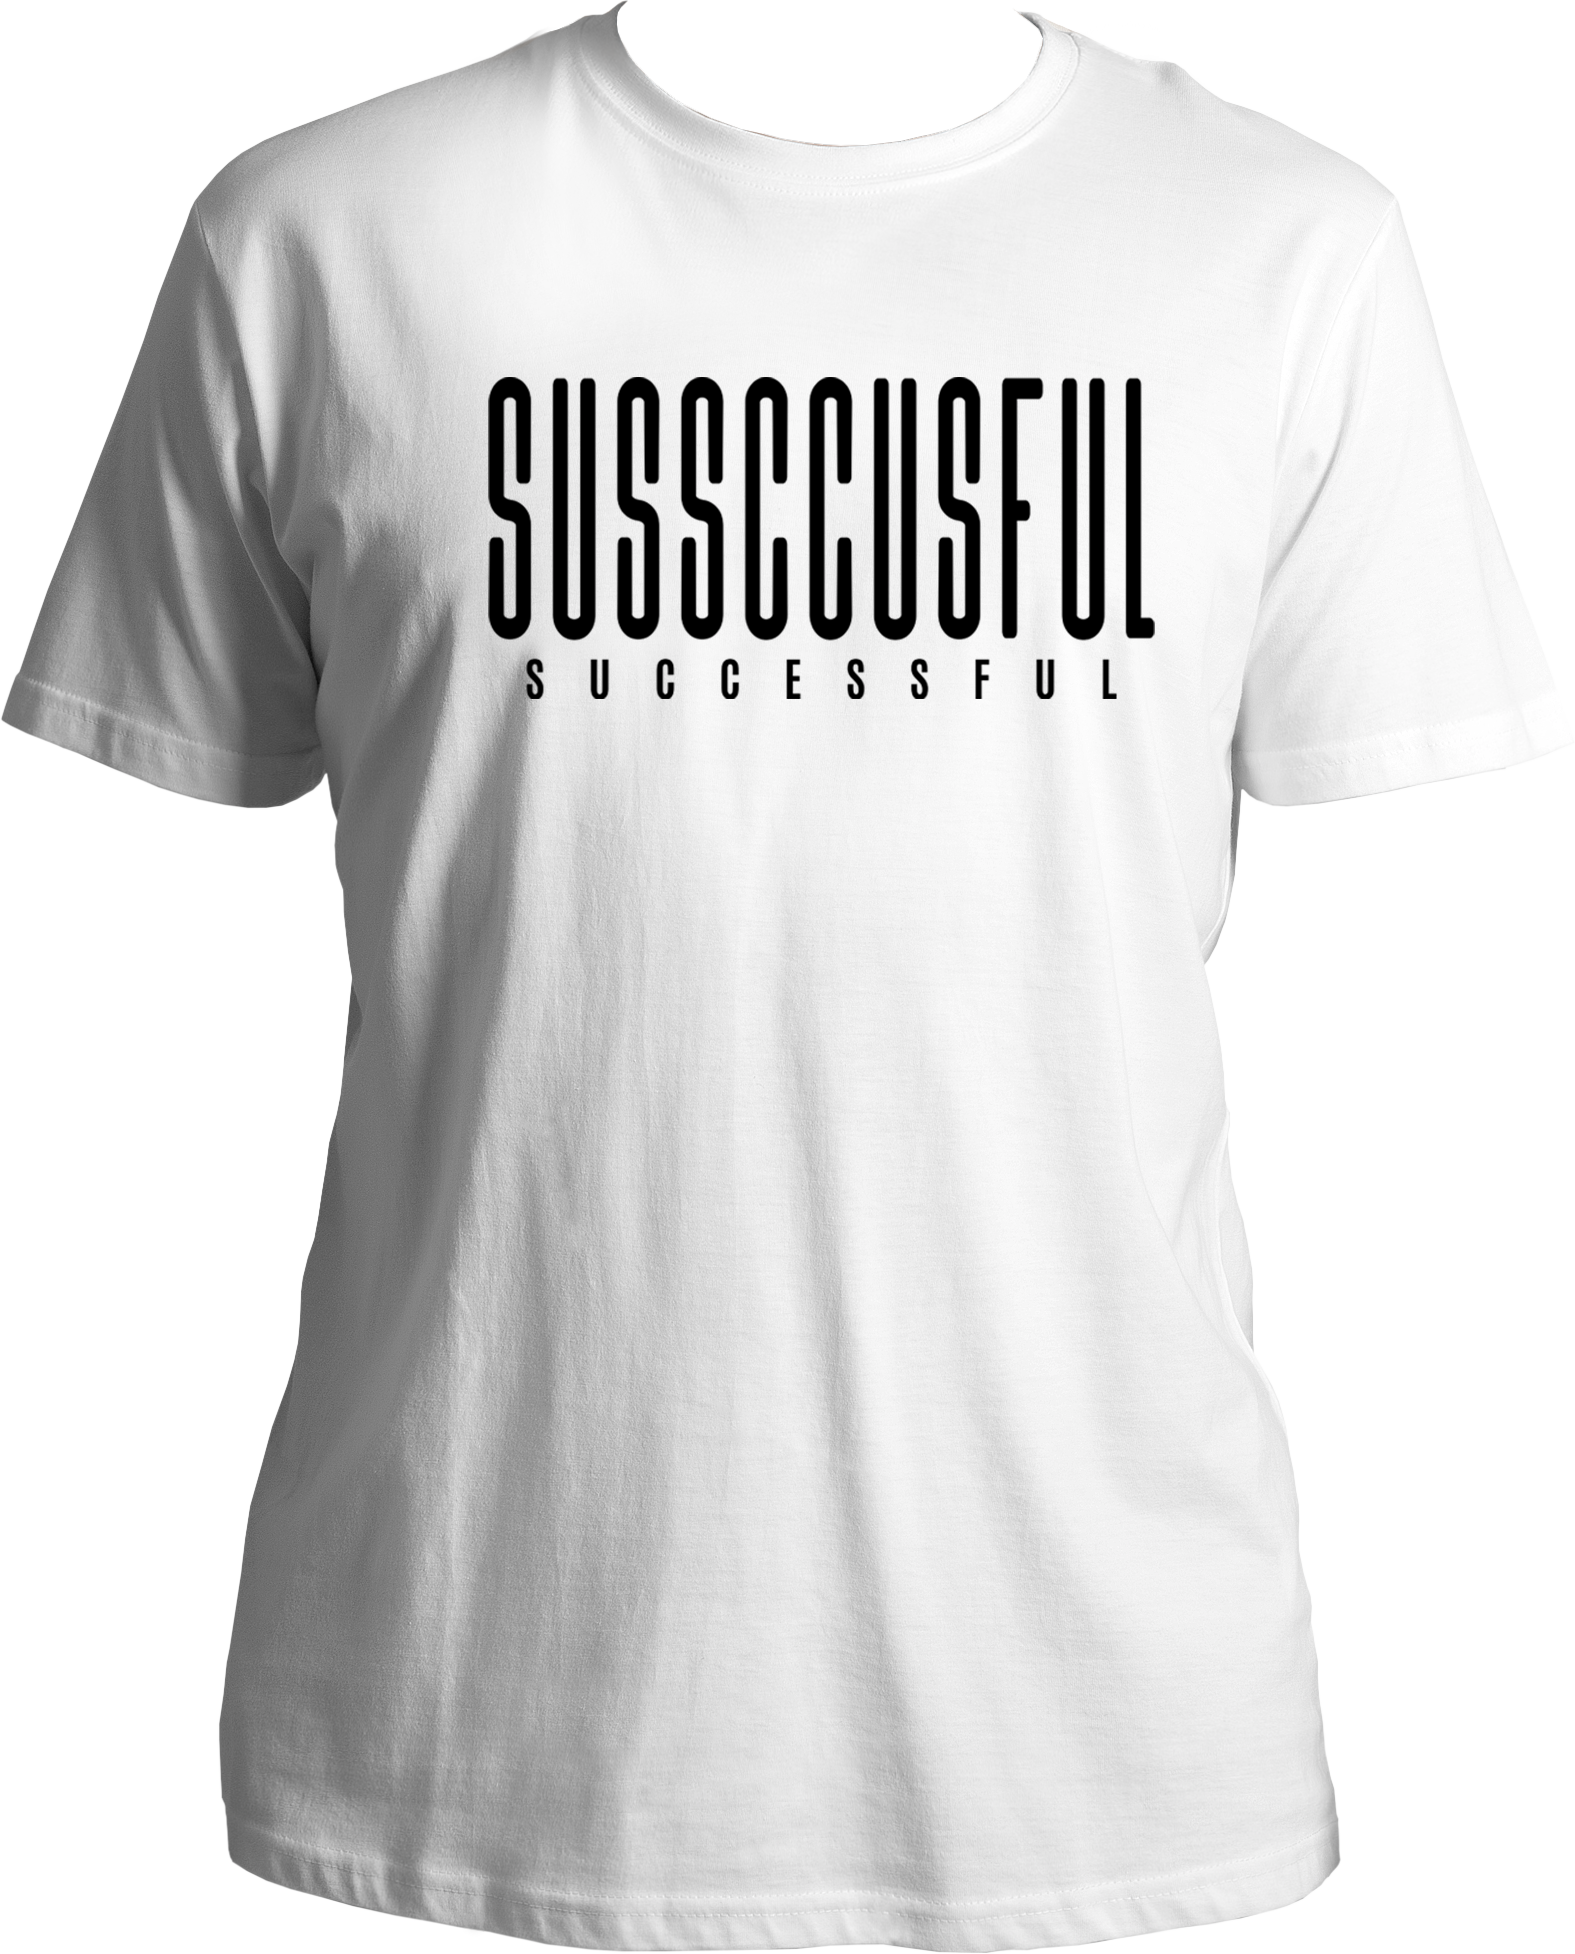 "Be the trend with Garrari's Sussccusful Unisex T-Shirts! Made with 100% pure cotton, these funny and funky tees are perfect for creating viral reels with the viral audio. Order now and join the fun!" #bageshwardham #bageshwardhamsarkar